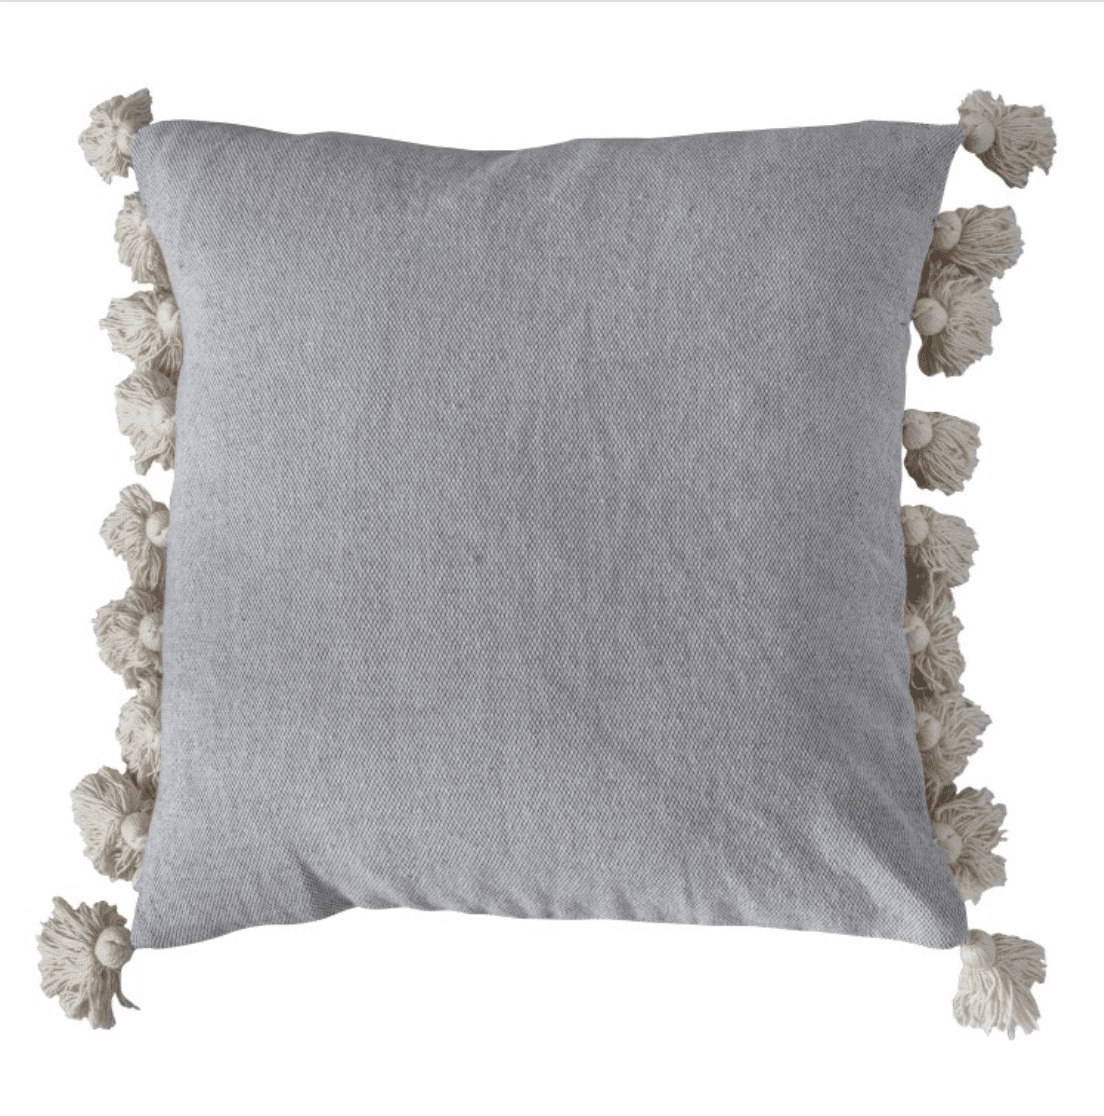 Grey Tassel Cushion - Outlet - Save 20%